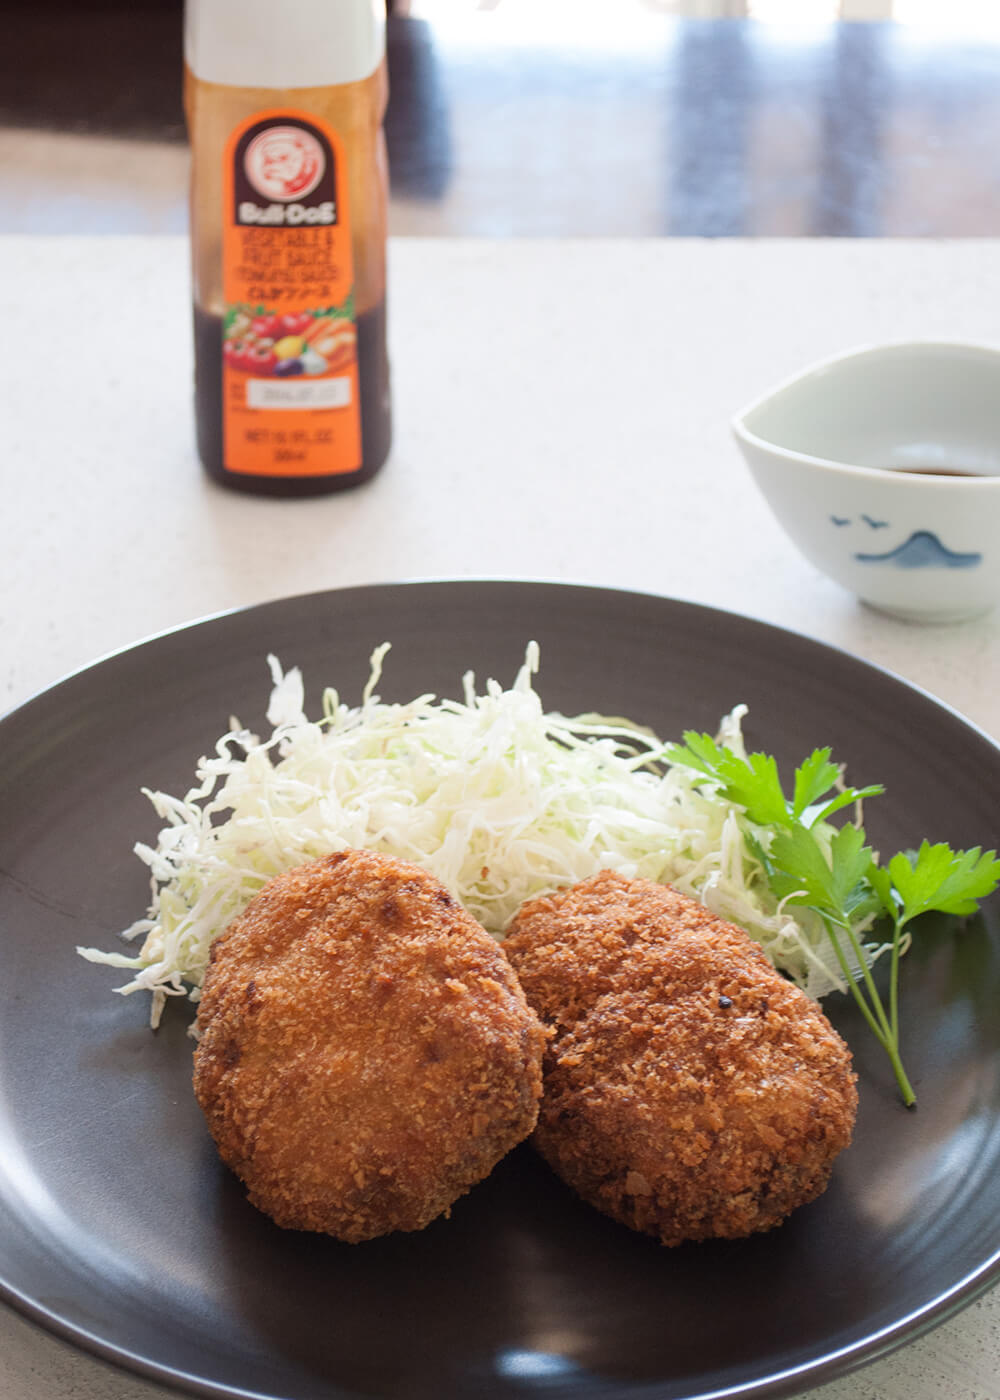 Crunchy outside, fluffy and a little bit sweet inside. Korokke (コロッケ, potato and ground meat croquette) is one of the very popular Japanese home cooking dishes. Have it with tonkatsu sauce (sweet Worcestershire sauce).